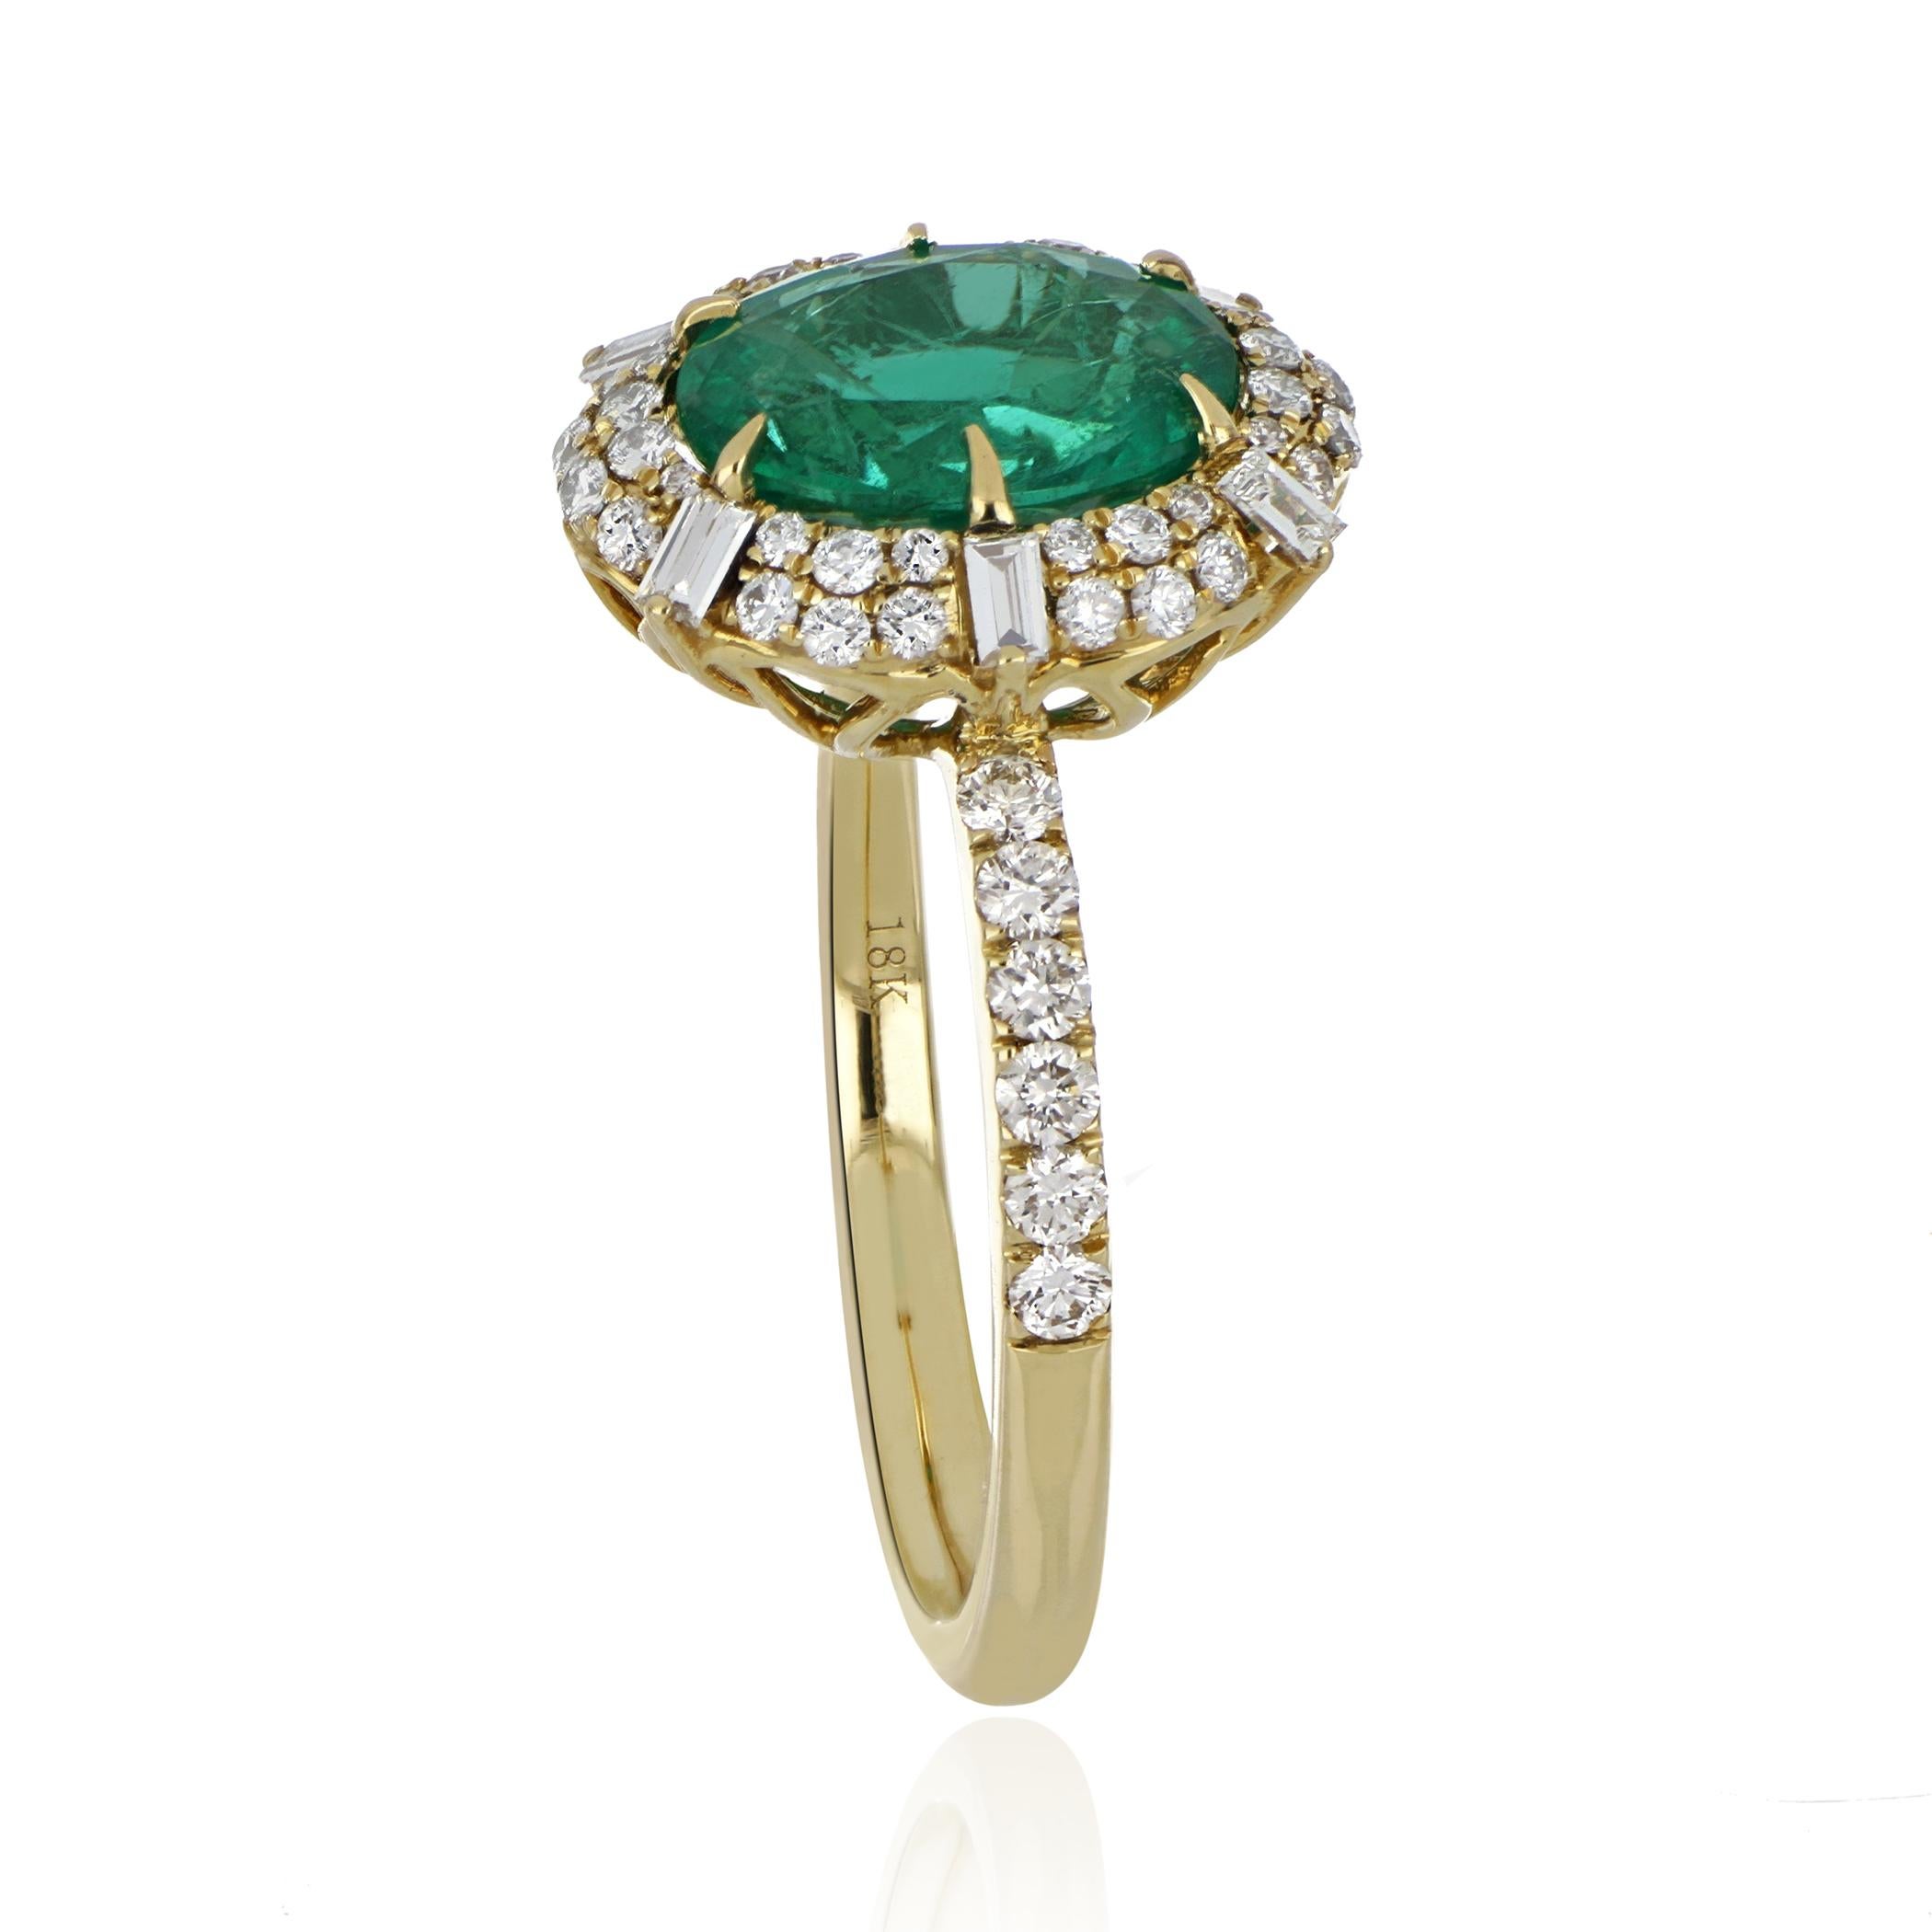 Contemporary 1.63 Carat Emerald Ring with Diamonds in 18 Karat Yellow Gold